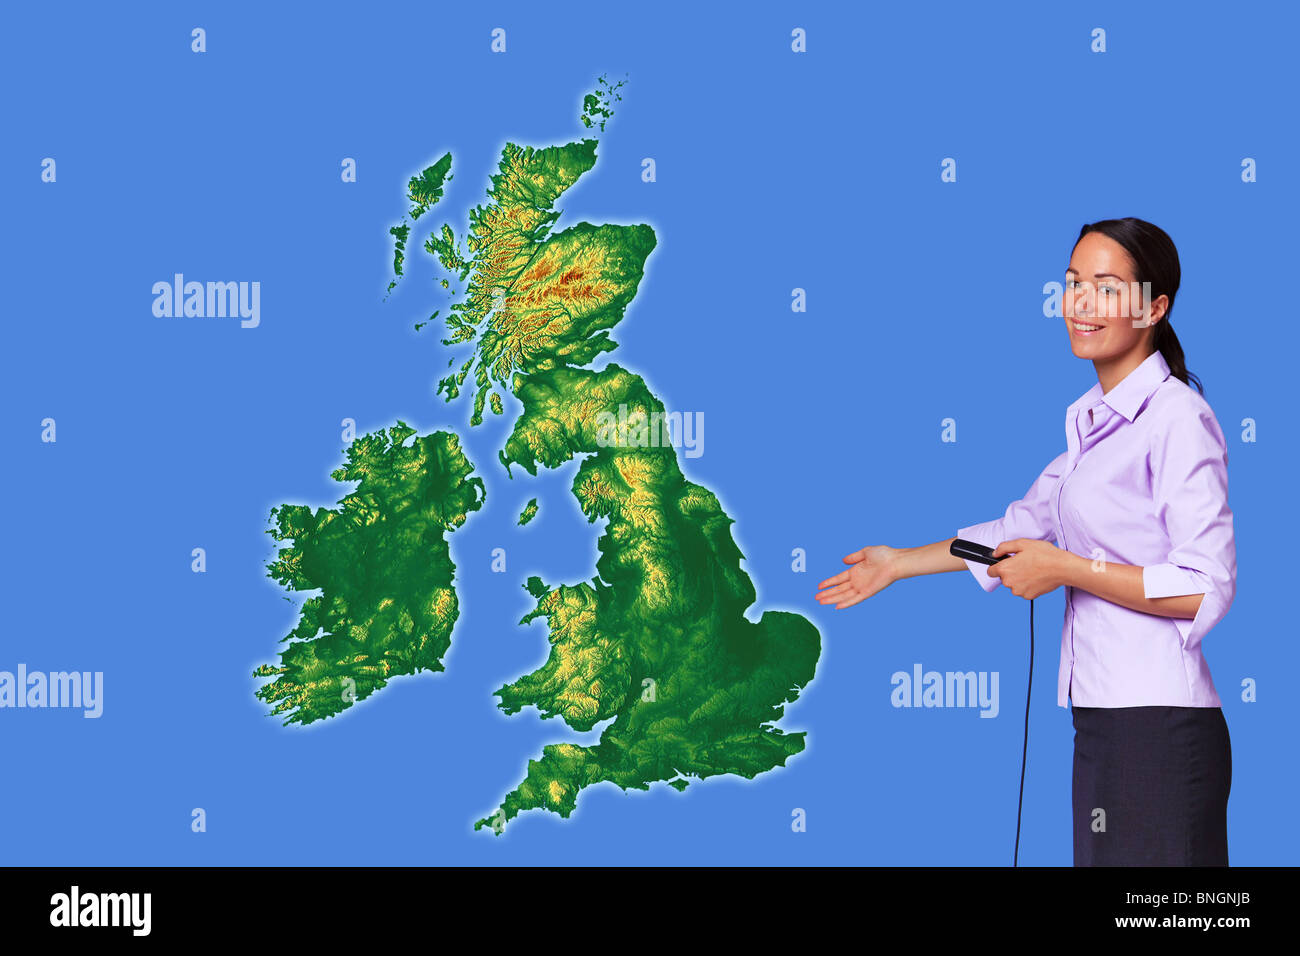 Female weather presenter with blank map of UK. Map from Google maps edited in Photoshop. Stock Photo